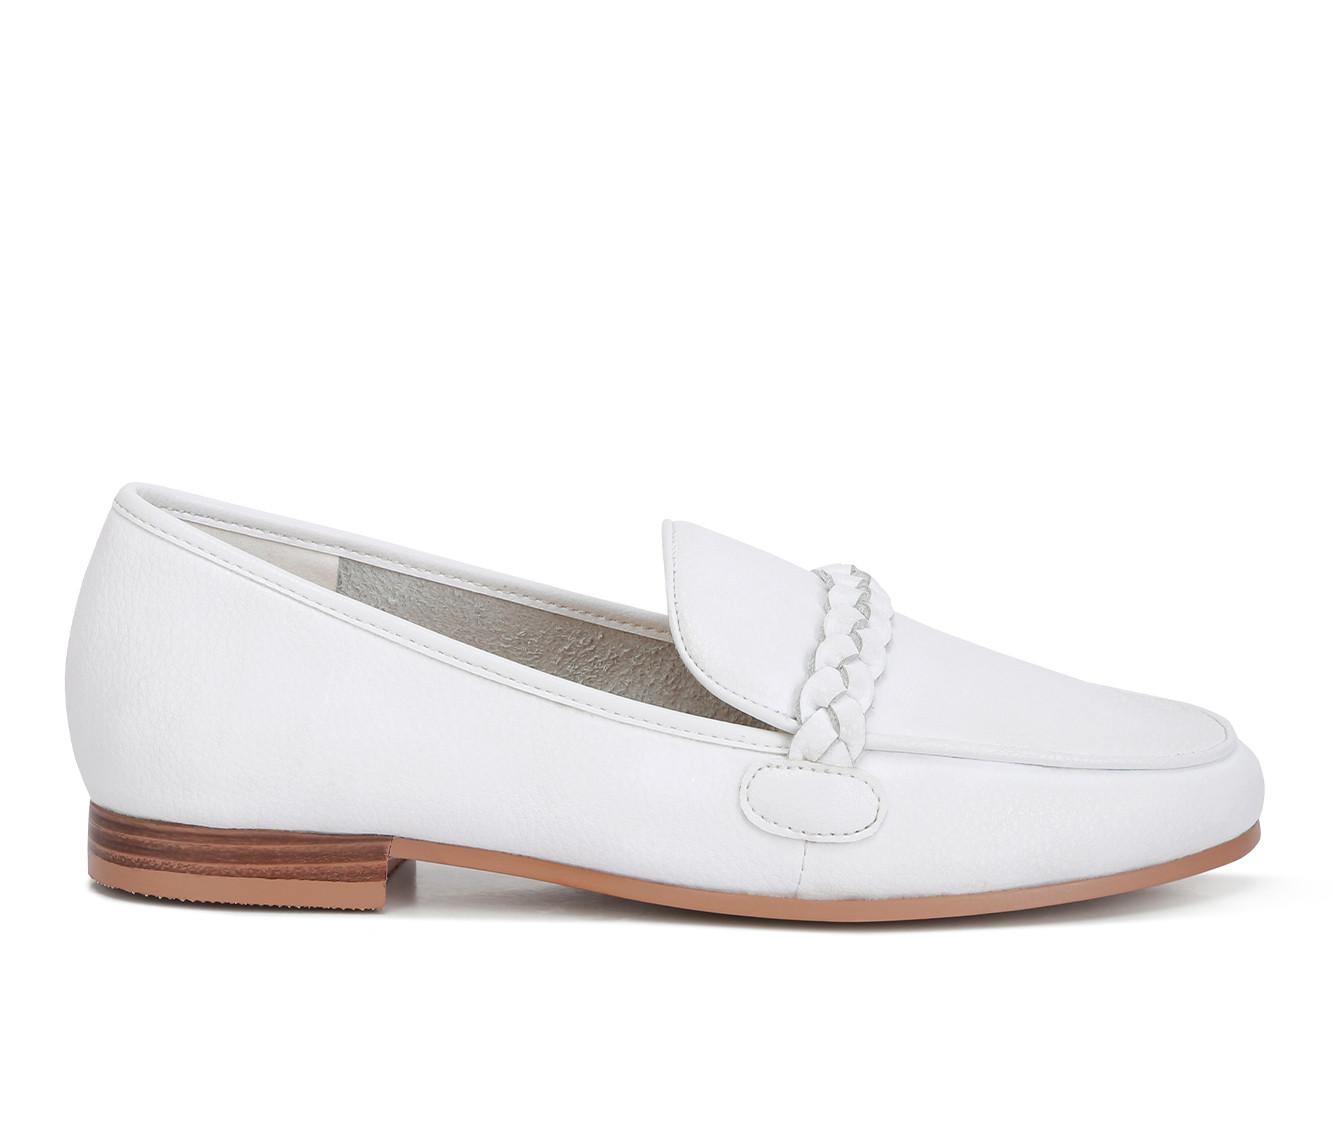 Women's Rag & Co Kita Recycled Leather Loafers